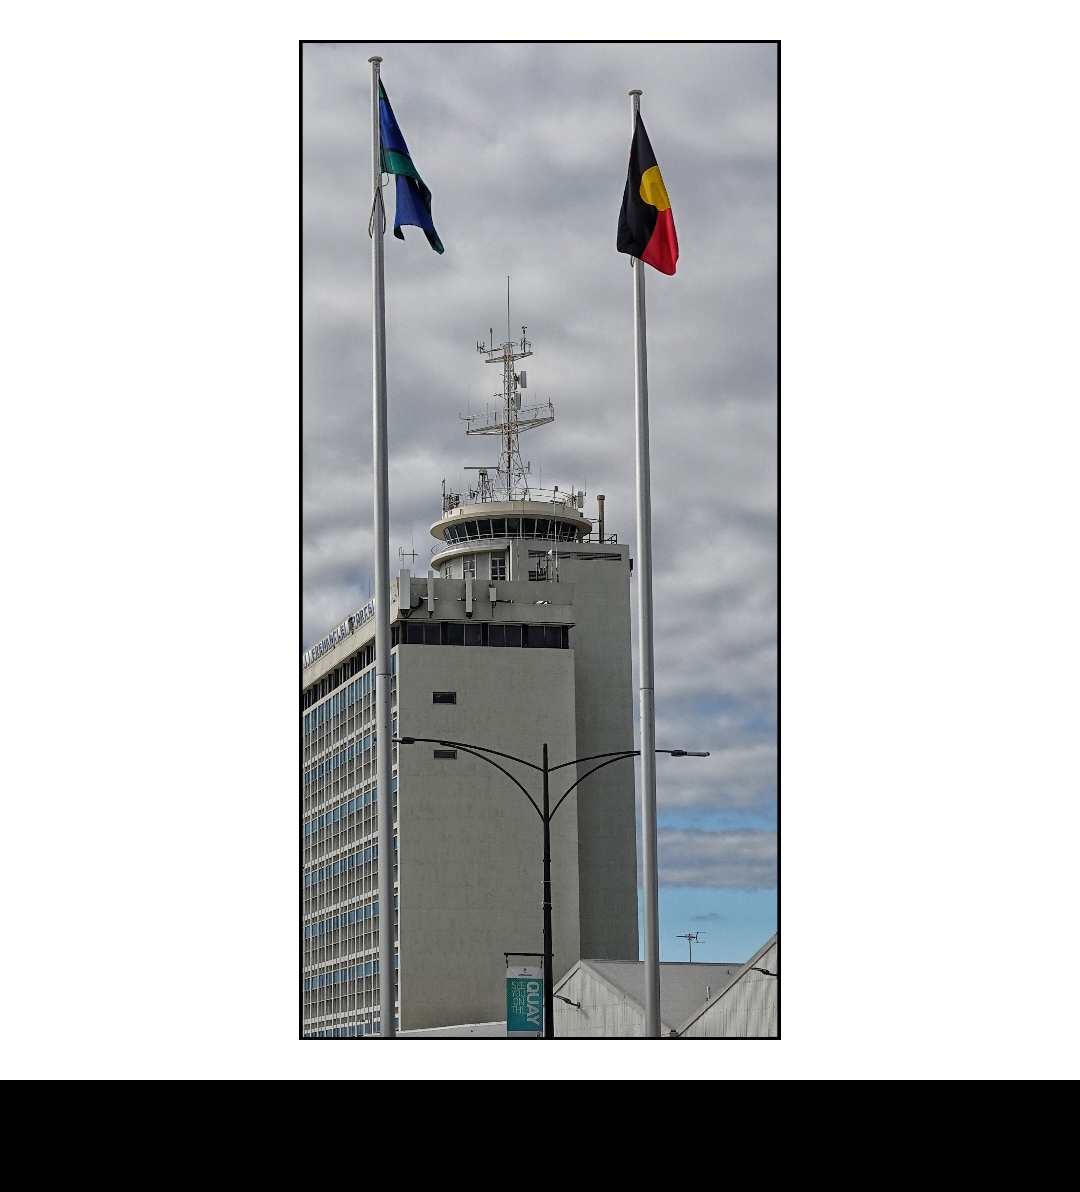 A favourite building of ours, flying the Australian Indigenous and Torres Strait islander flags above the Port